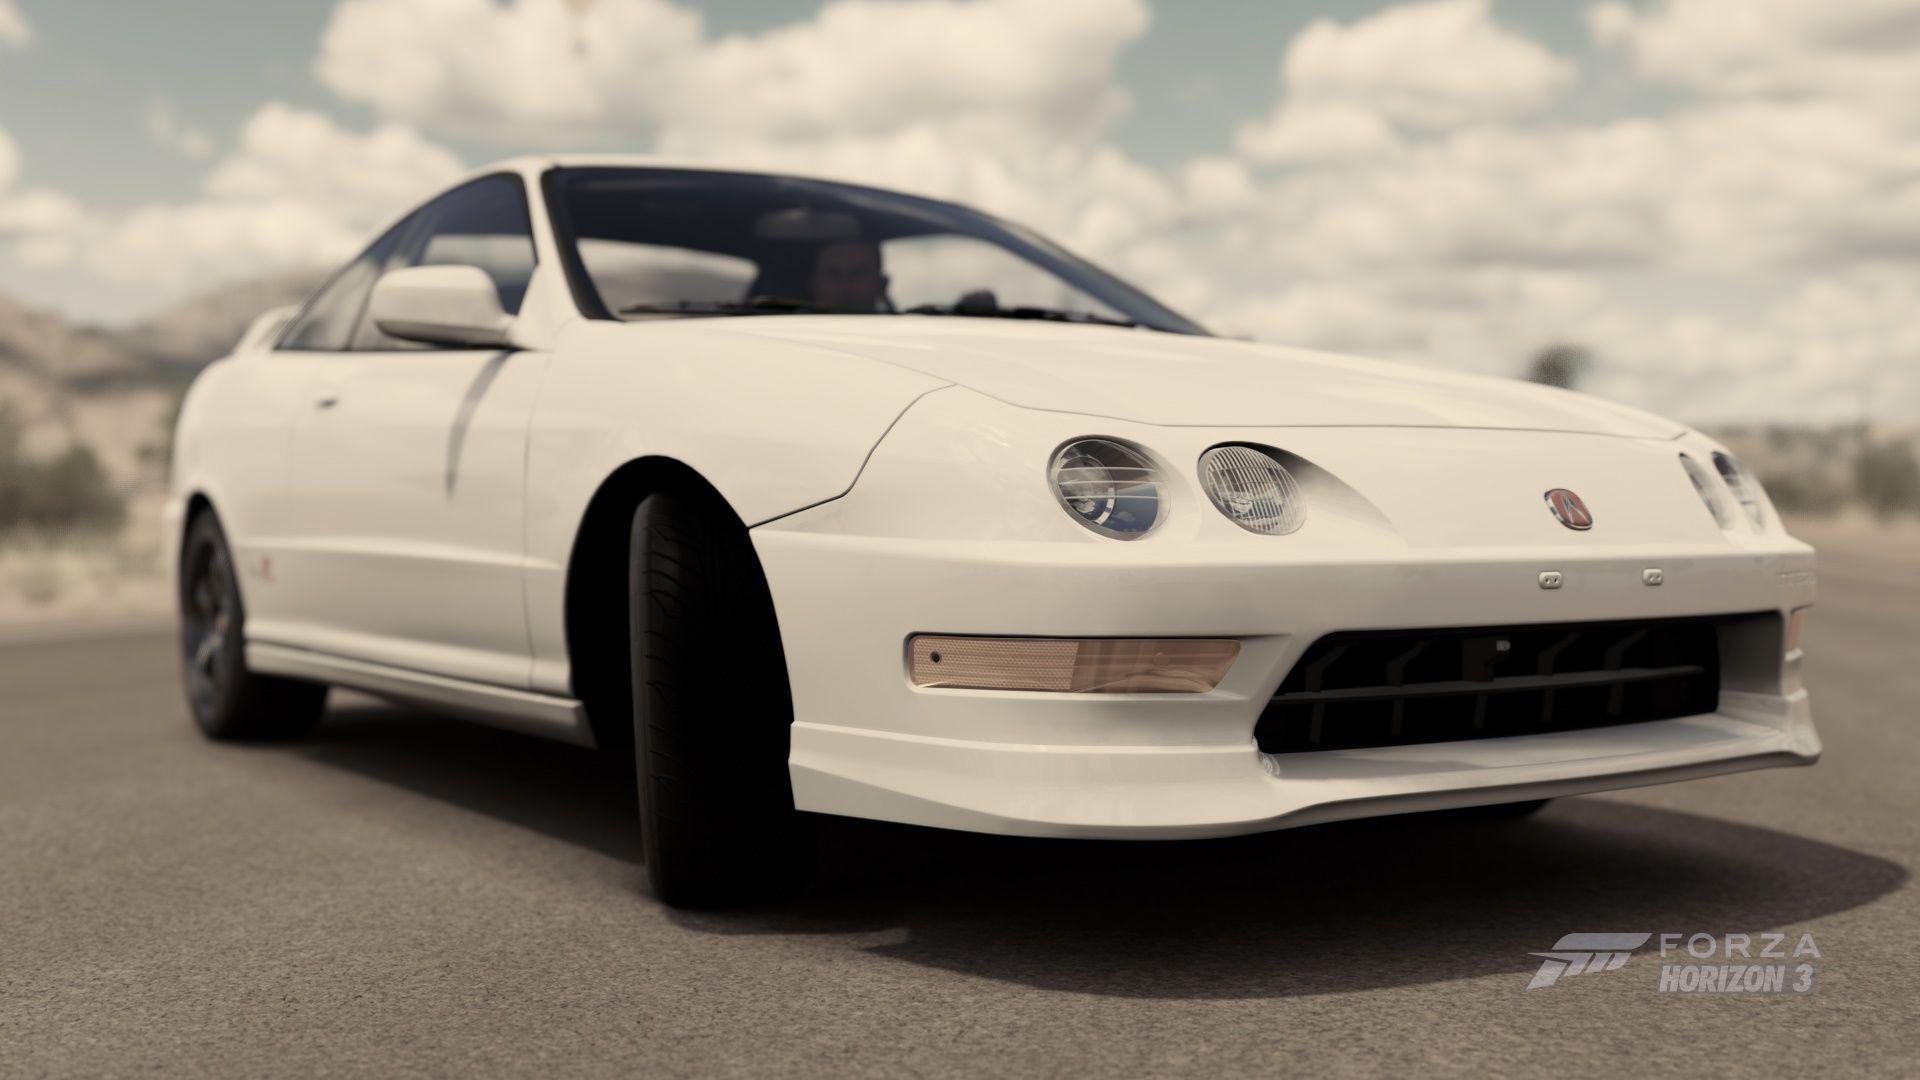 One of the coolest FWD cars, Acura Integra Type R